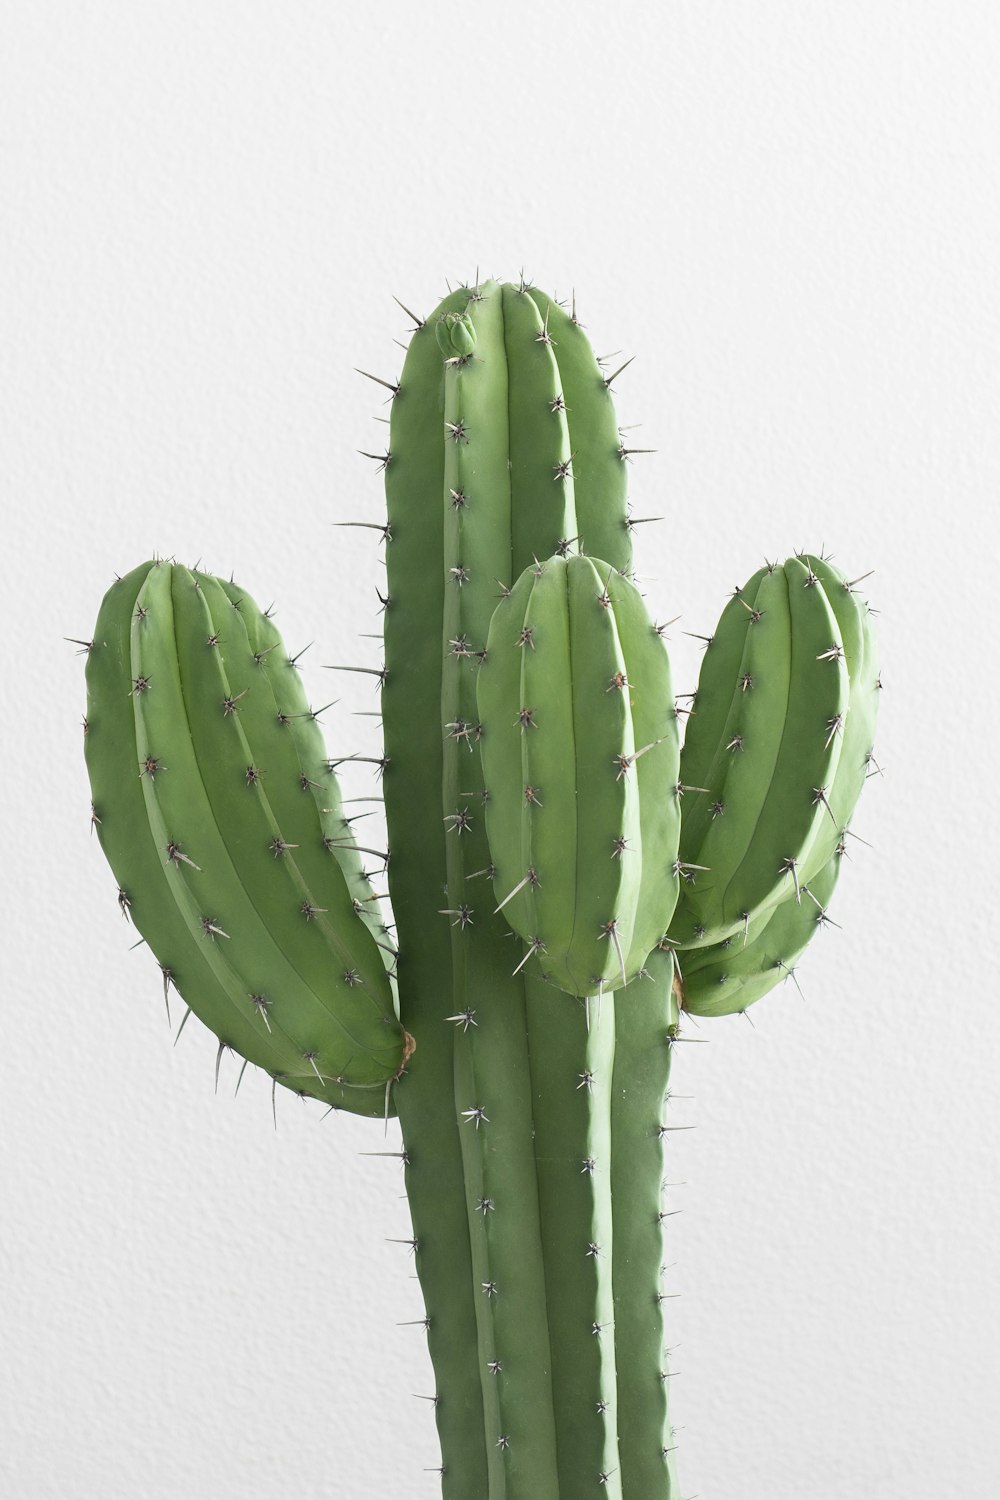 Cactus Pictures | Download Free Images on Unsplash